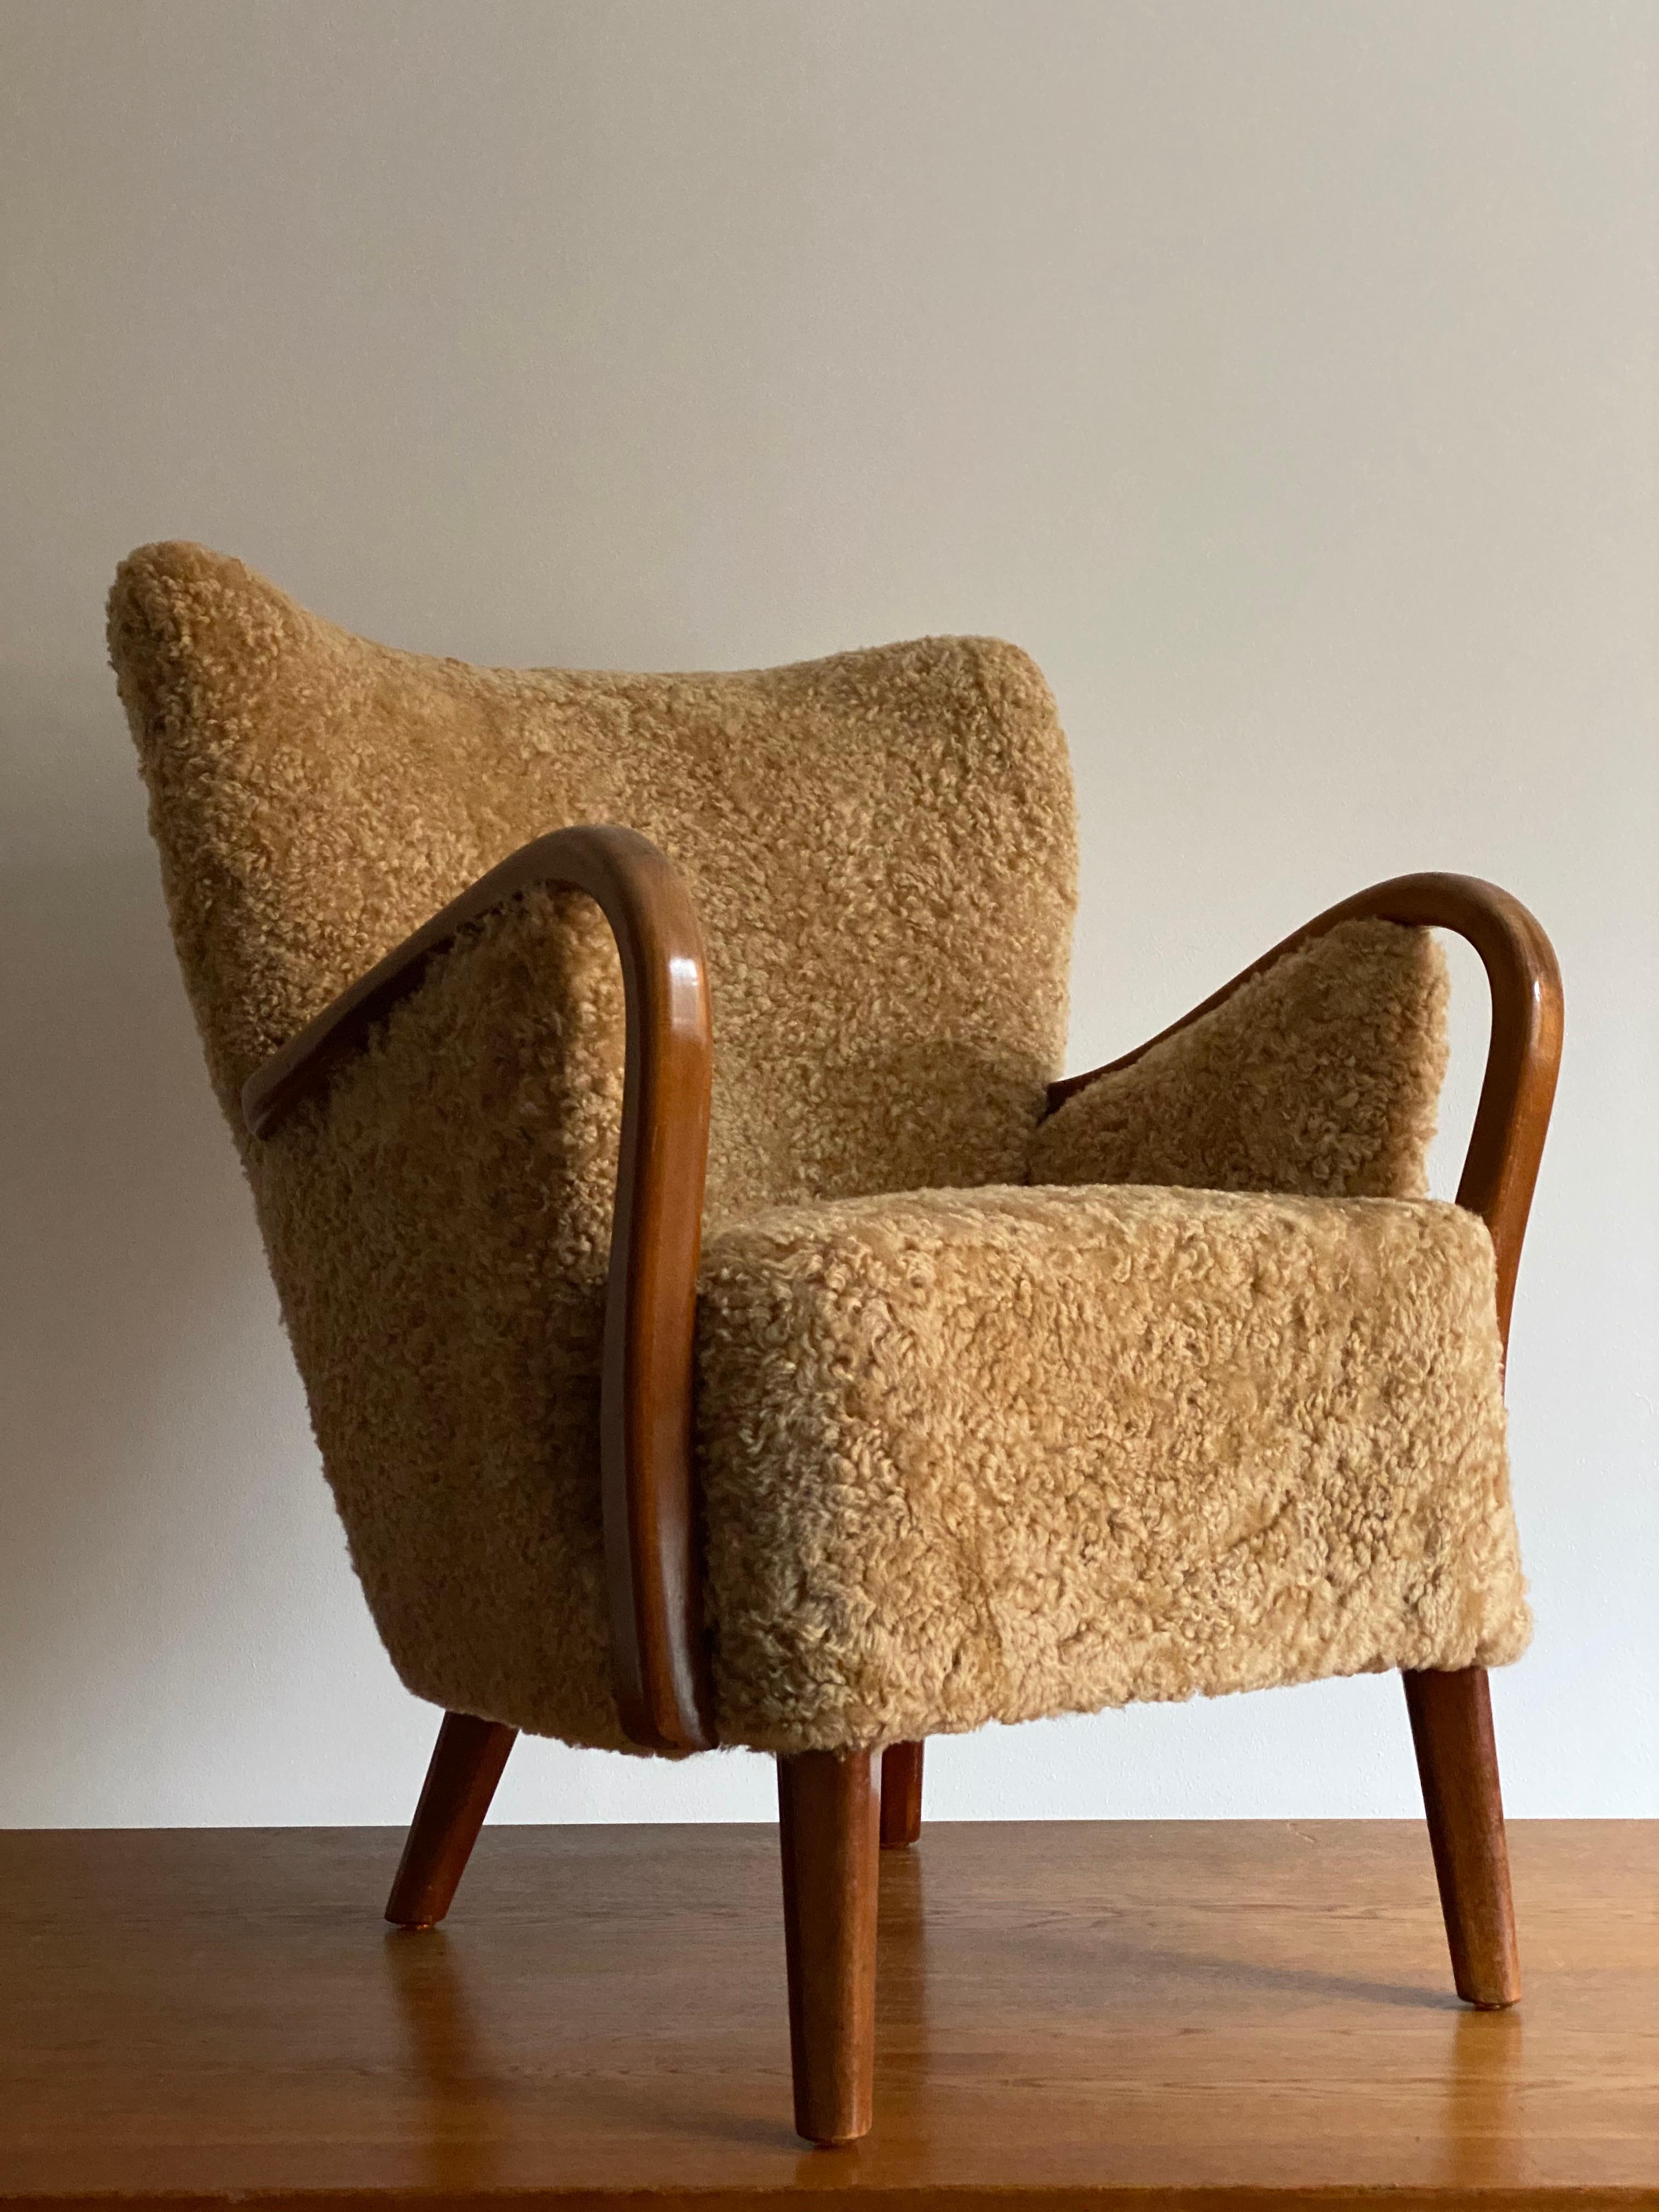 An organic lounge chair or armchair, designed by an unknown Danish modernist designer, late 1940s or early 1950s.

The sofa organic form is further enhanced by the sheepskin upholstery.

Other designers working in similar organic style include